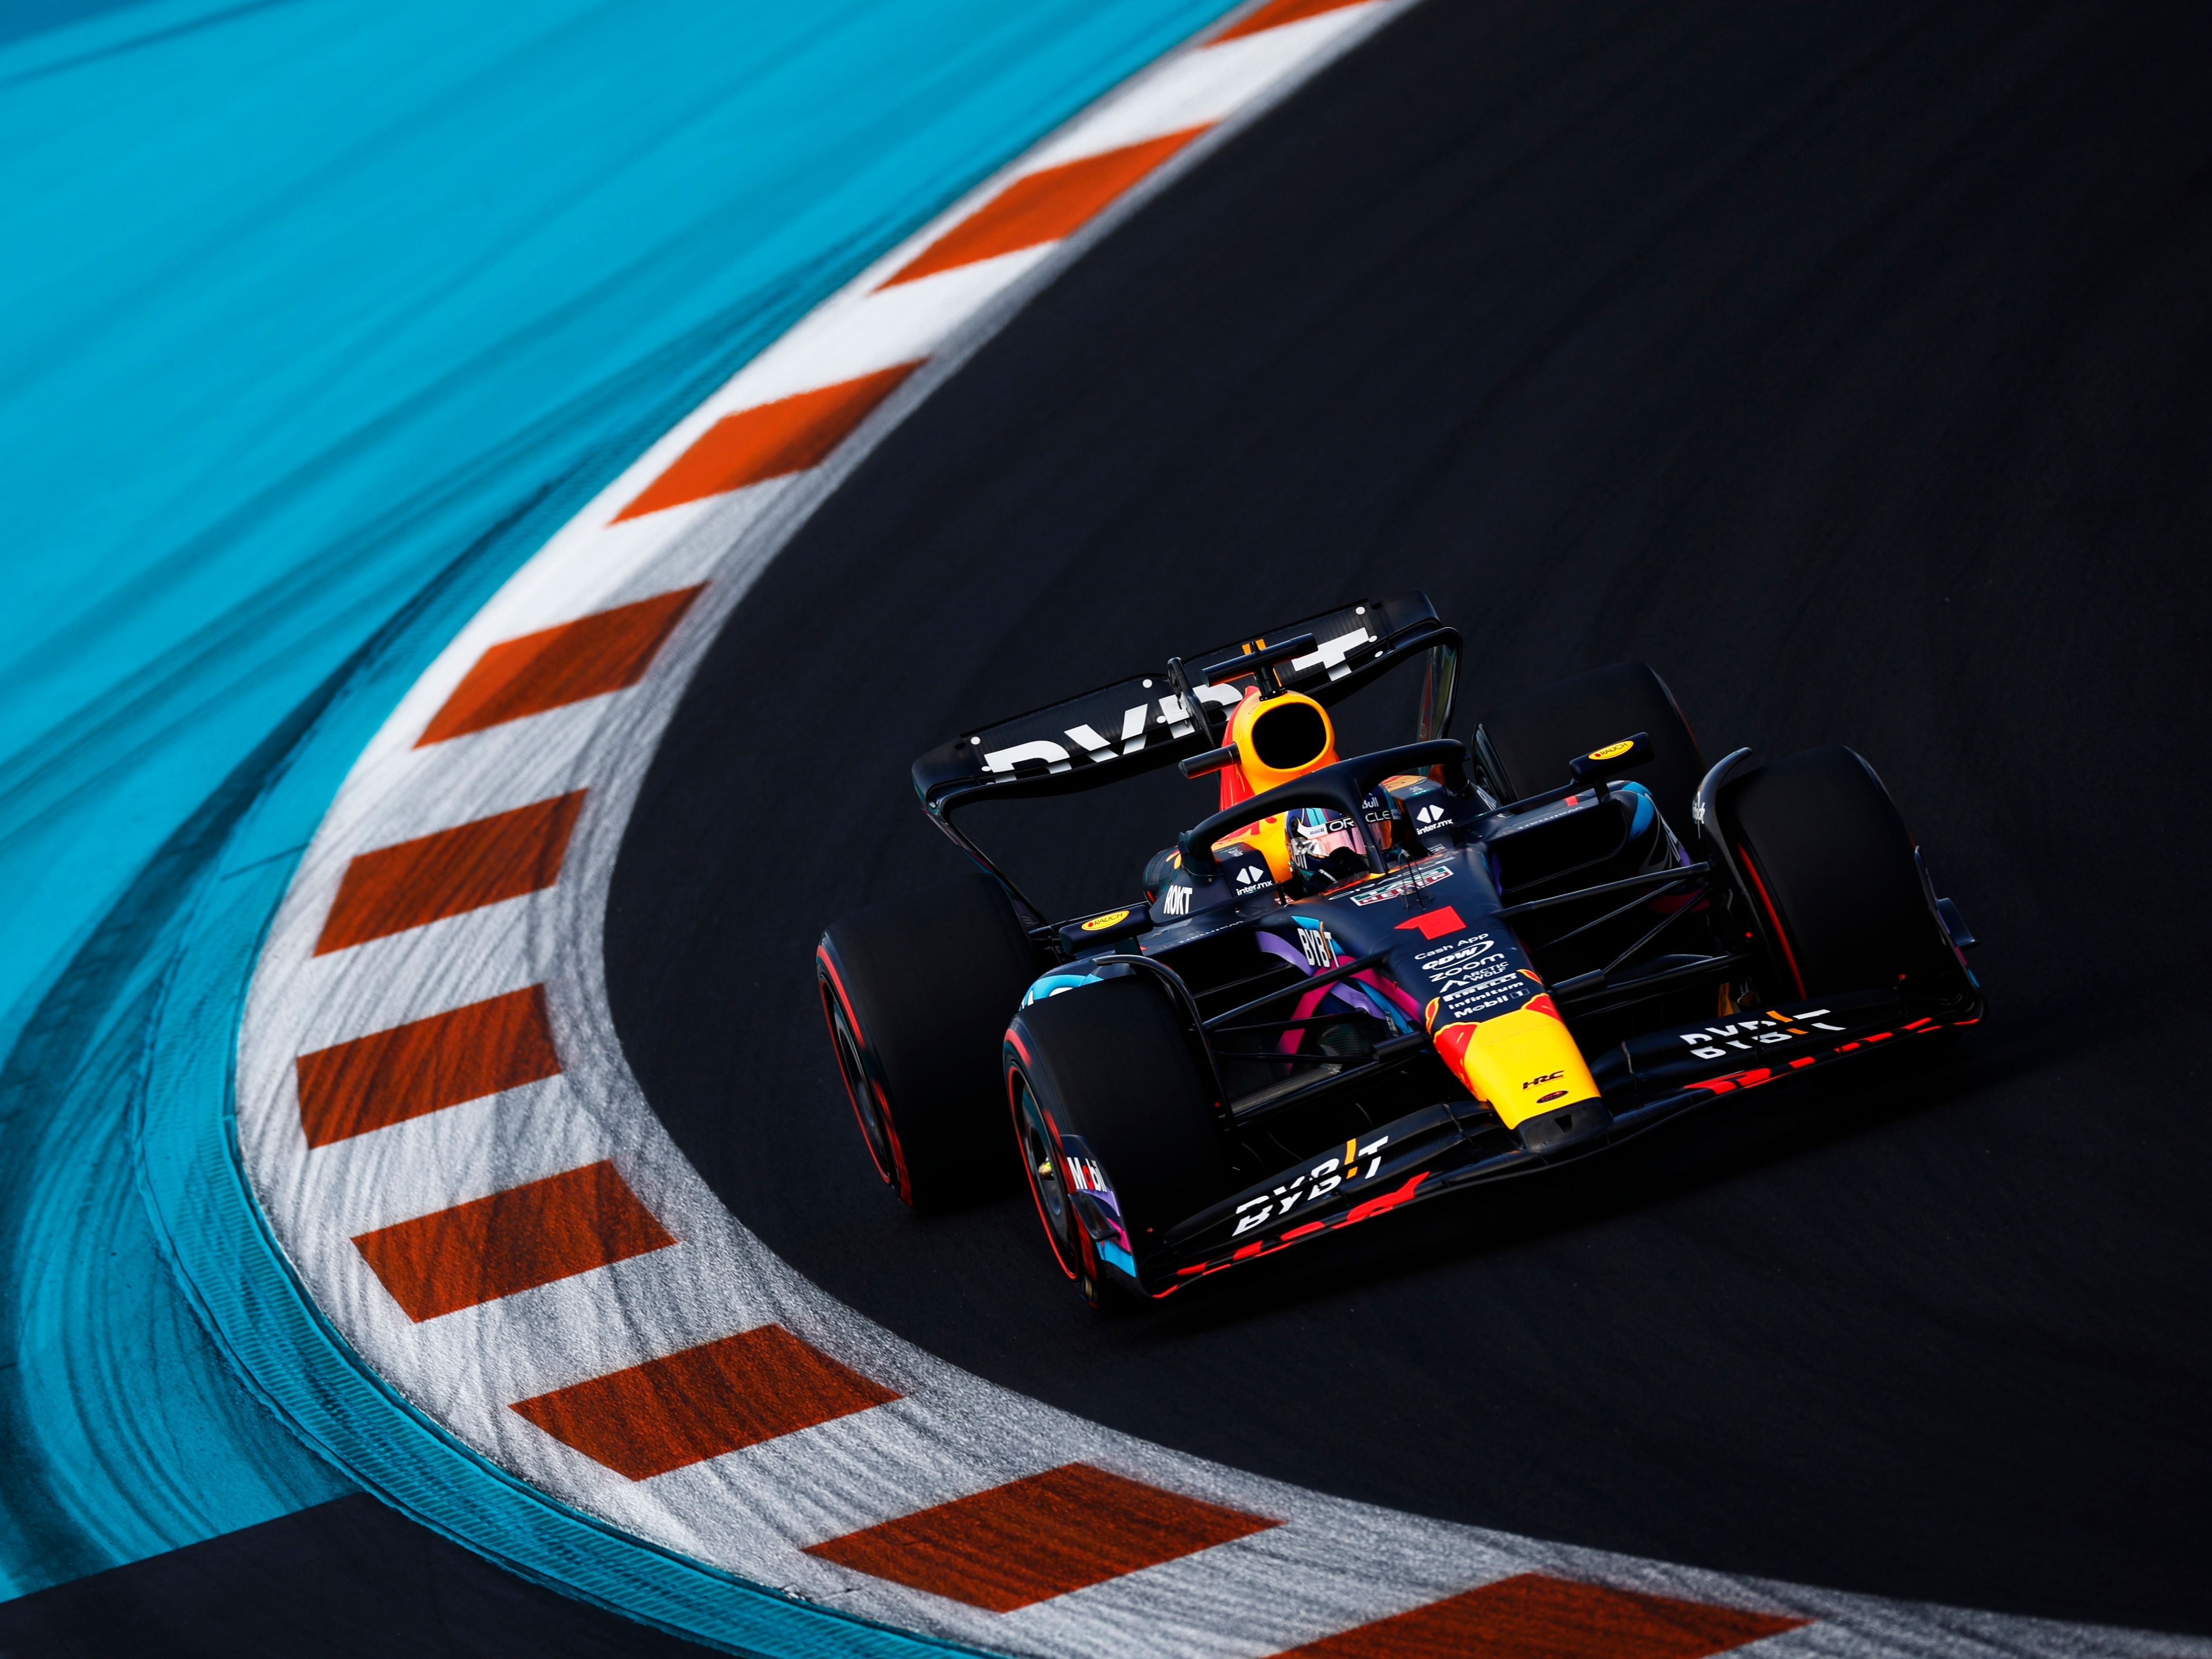 Max Verstappen (1) on track during qualifying ahead of the 2023 F1 Miami Grand Prix. (Photo by Jared C. Tilton/Getty Images)